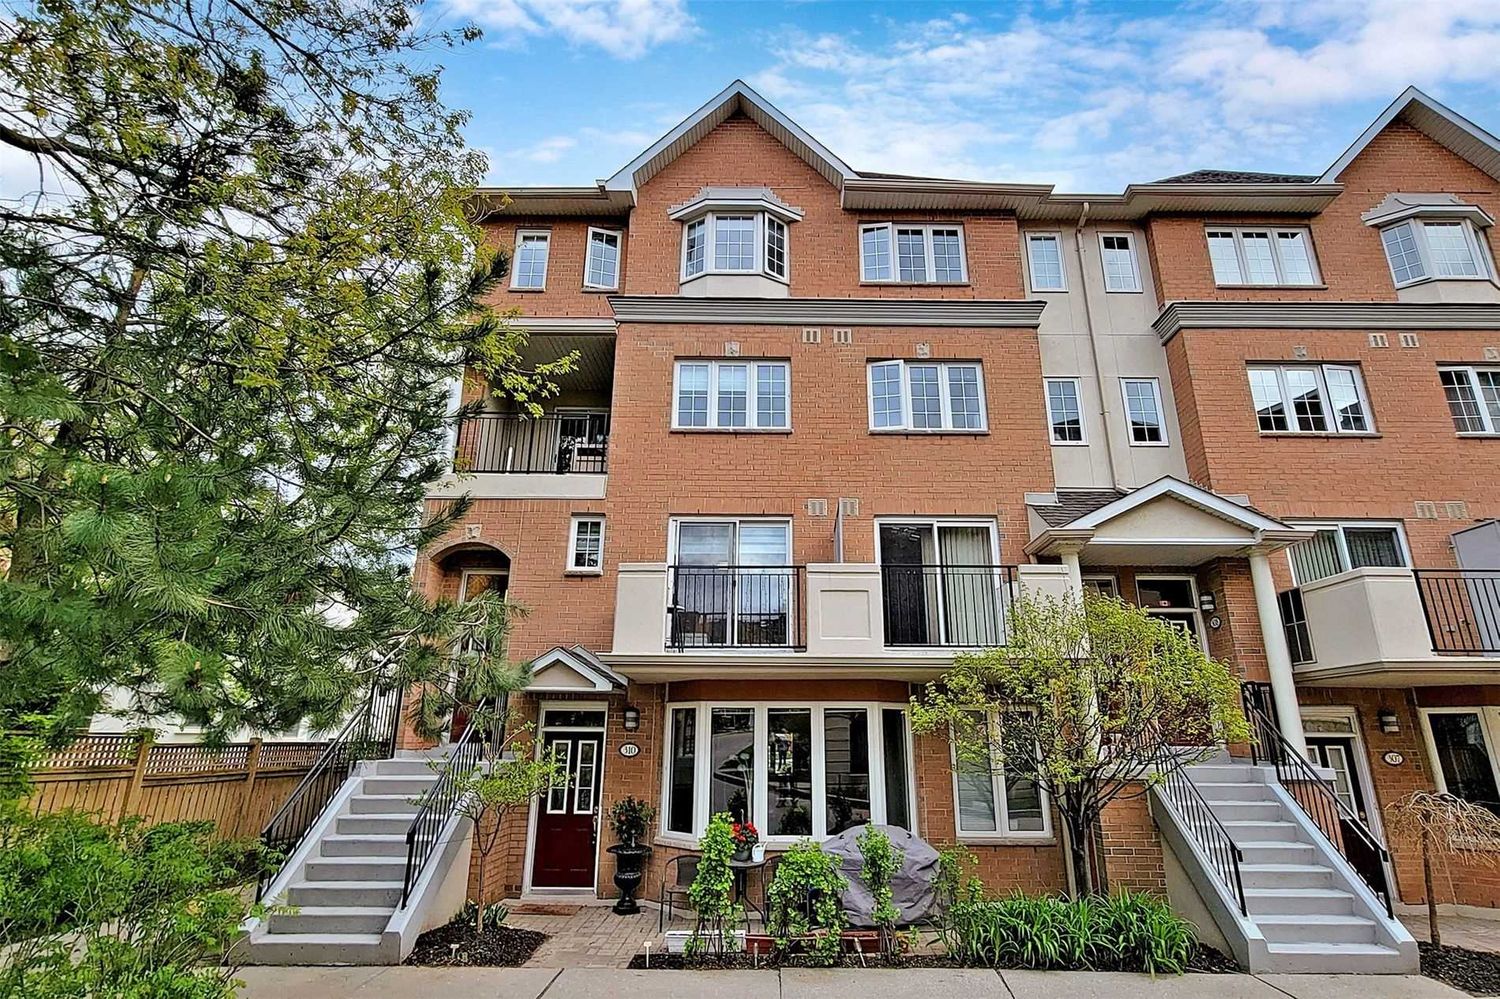 100-825 Grandview Way. Northtown Casitas I Townhomes is located in  North York, Toronto - image #2 of 2